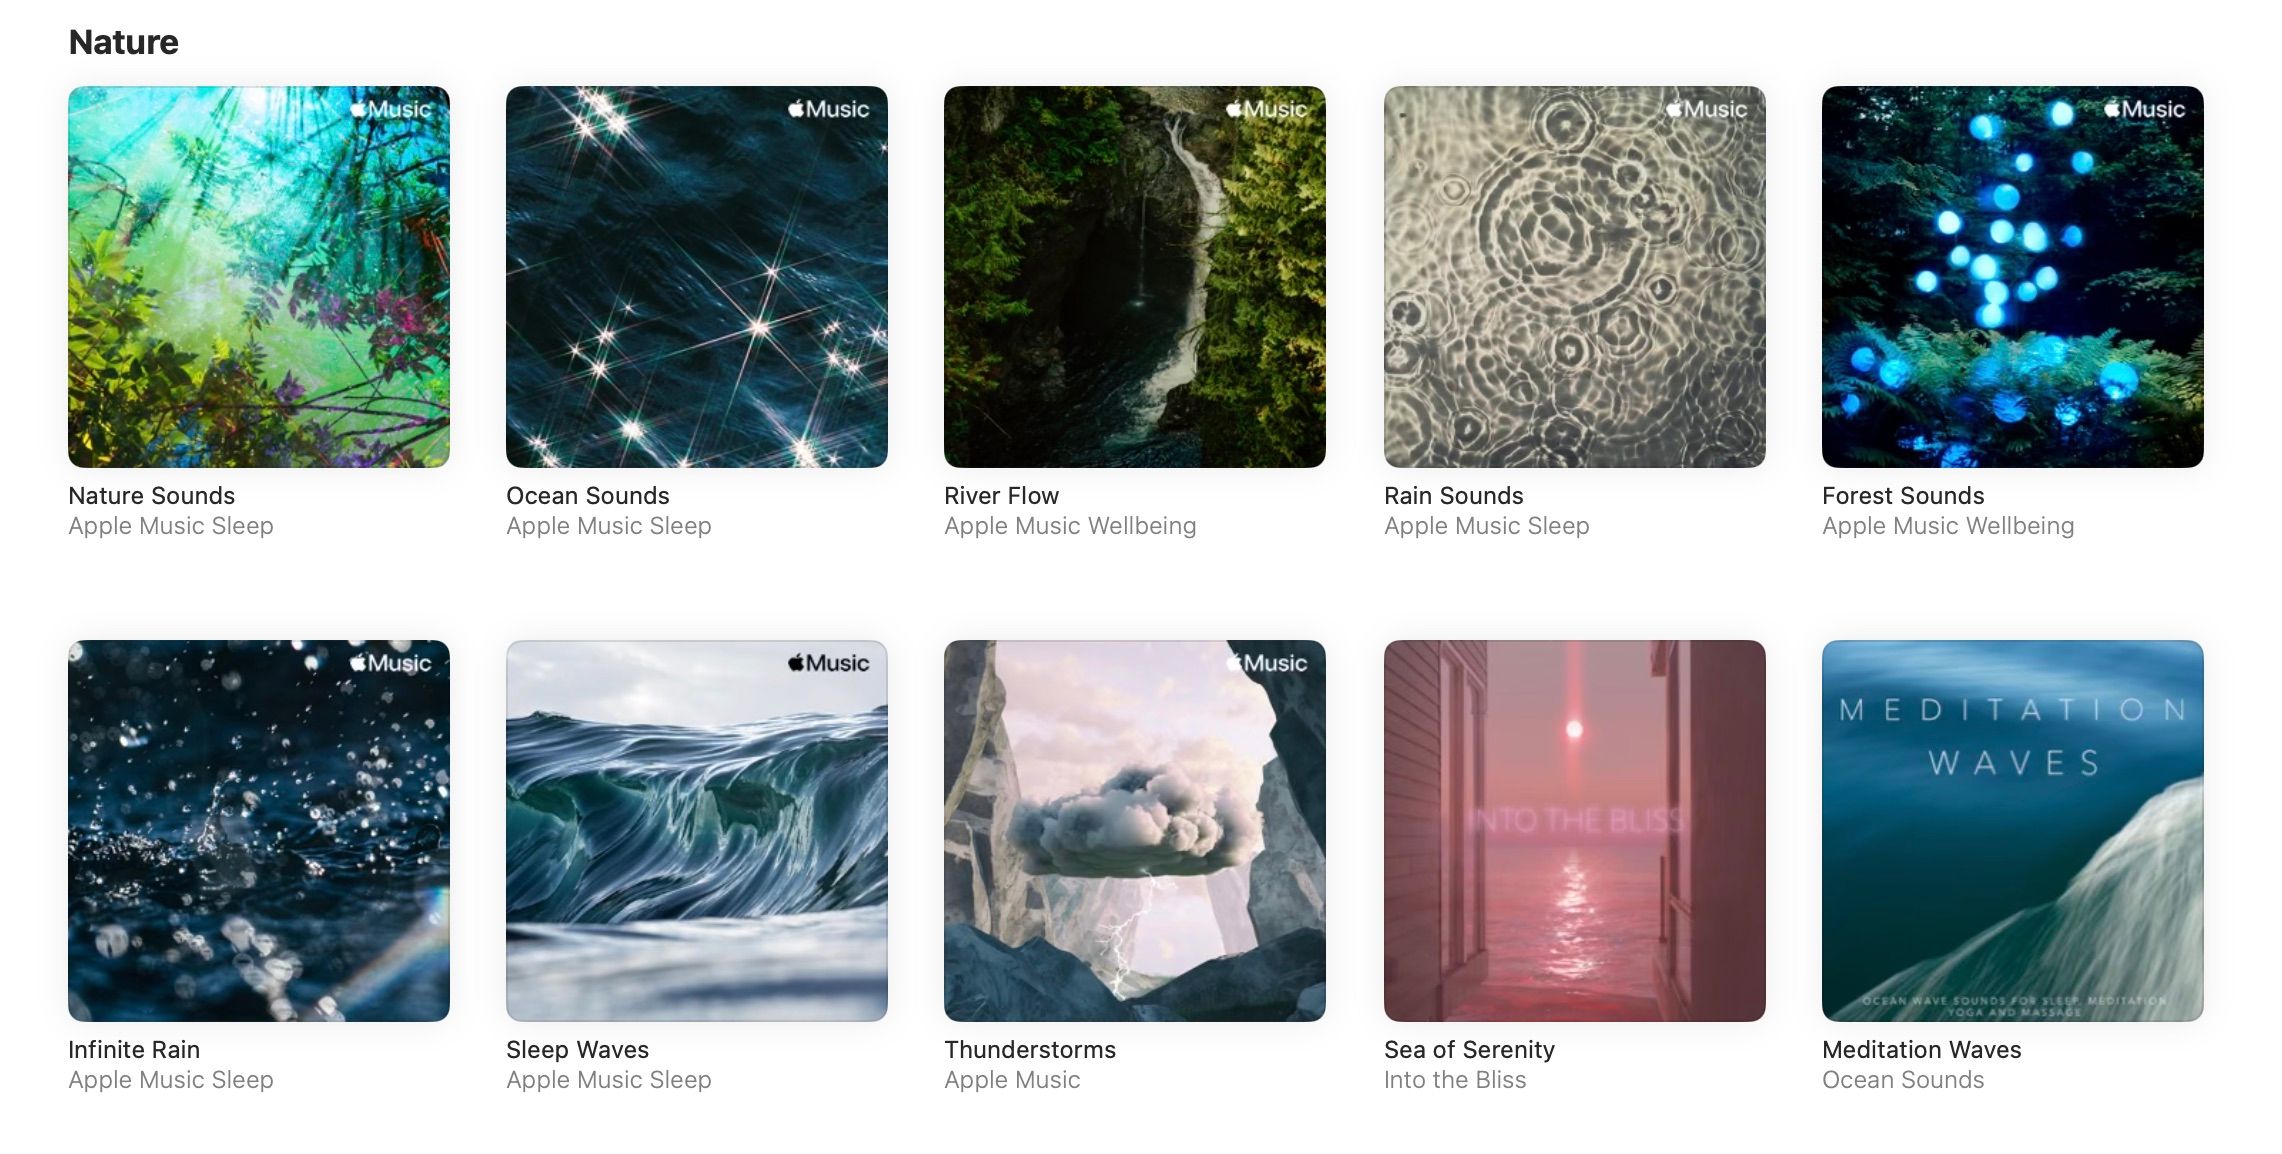 Screenshot of Apple Music Wellbeing Nature section